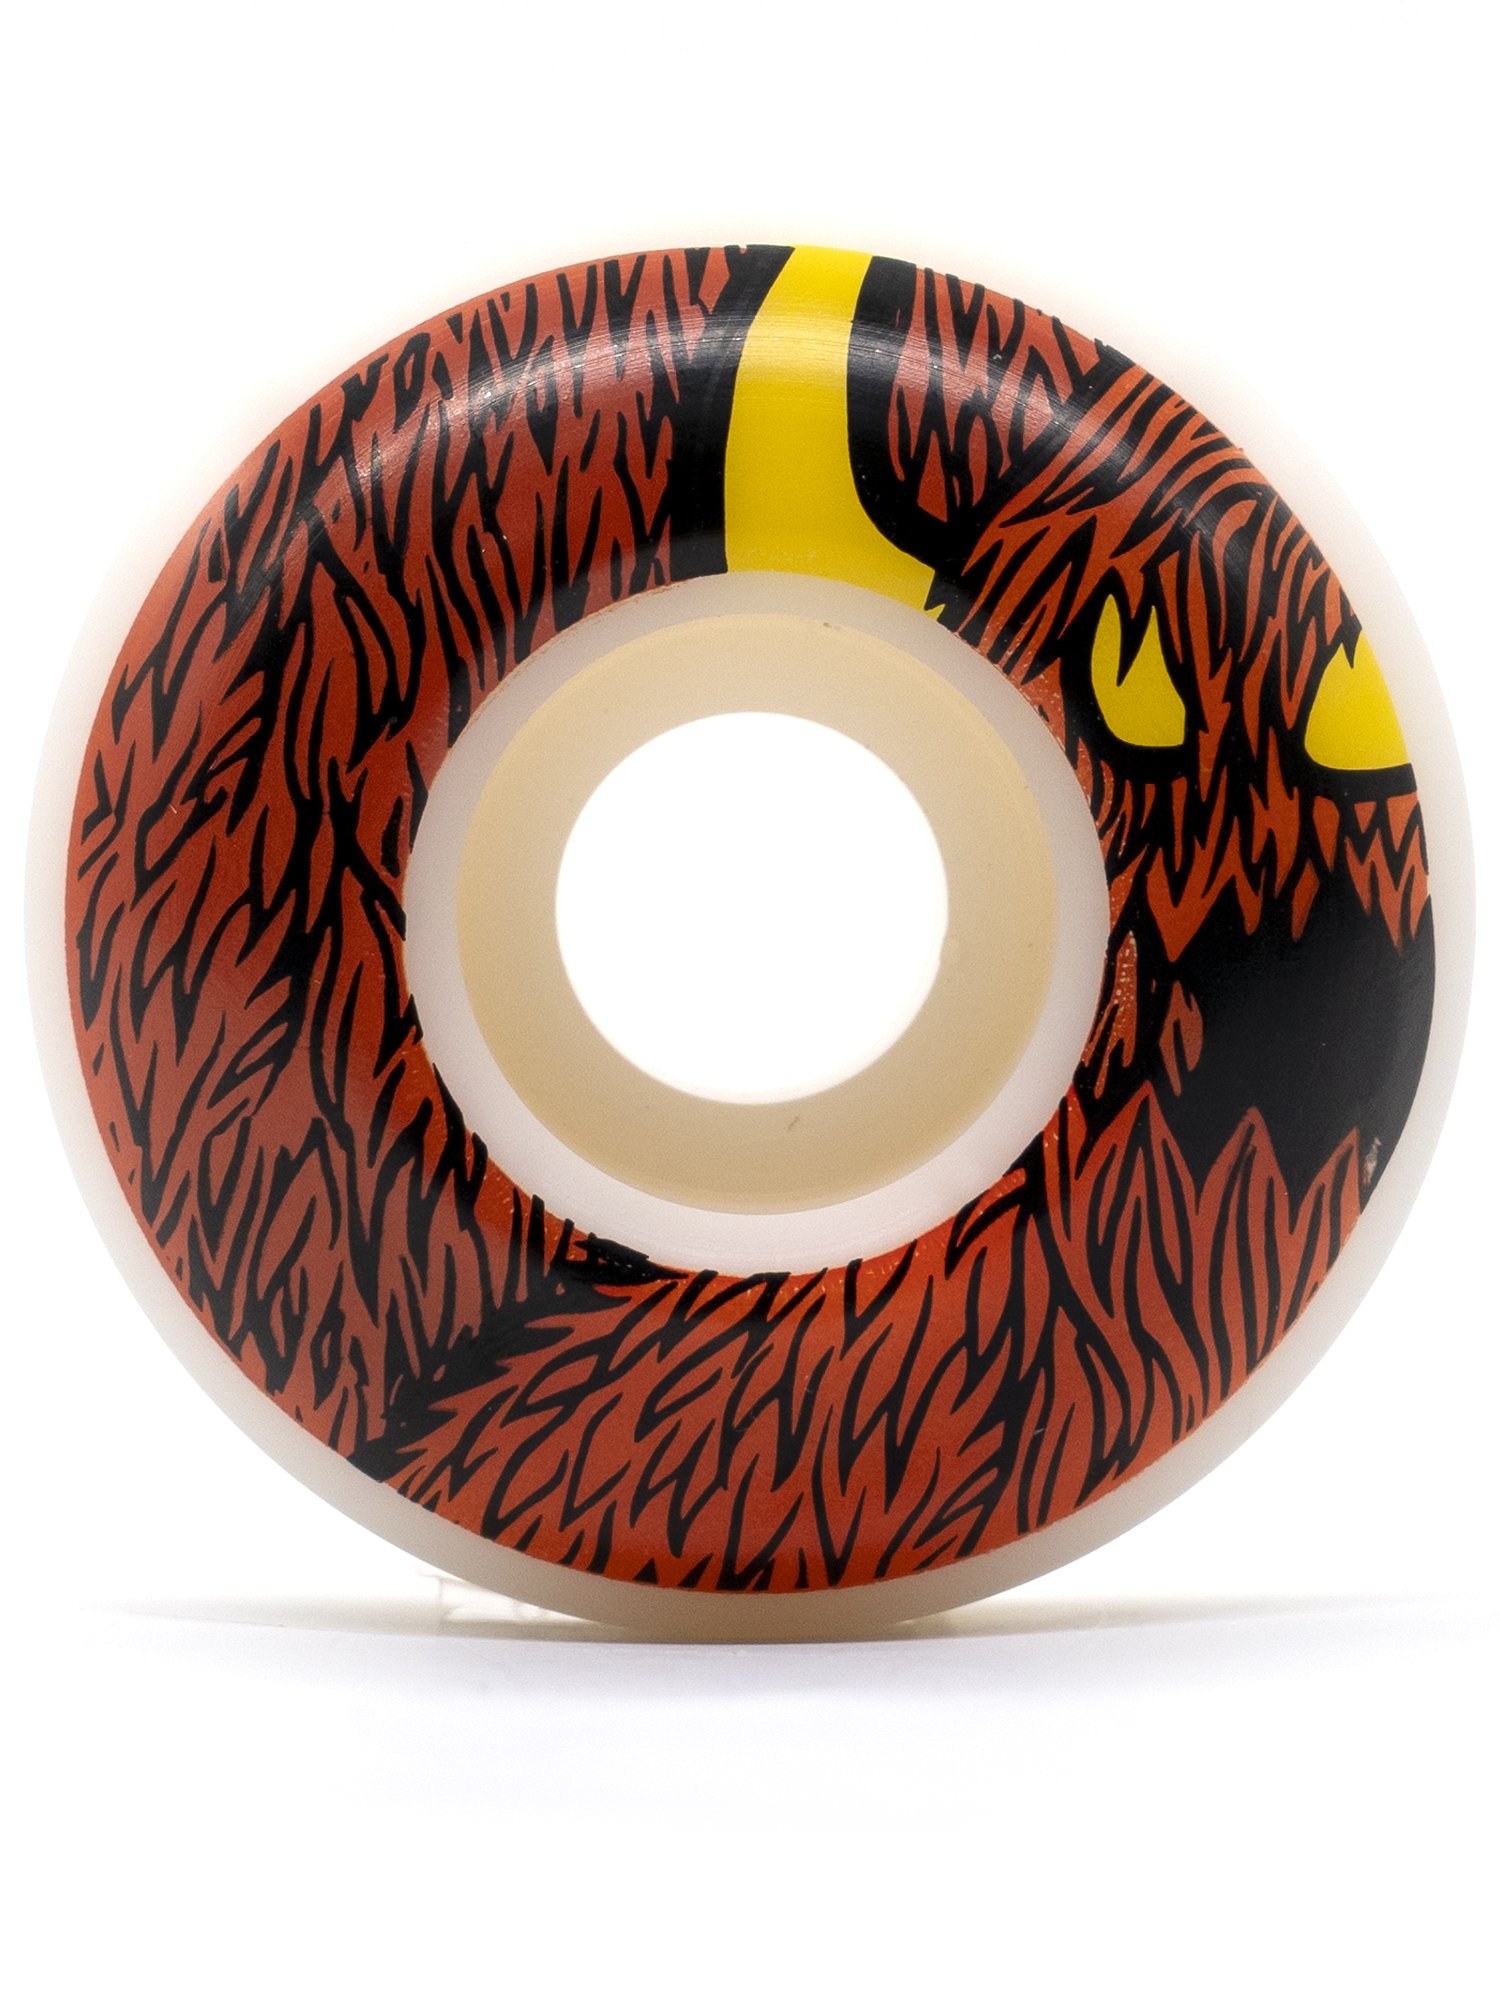 TOY MACHINE FURRY MONSTER WHEELS 54MM / 100A